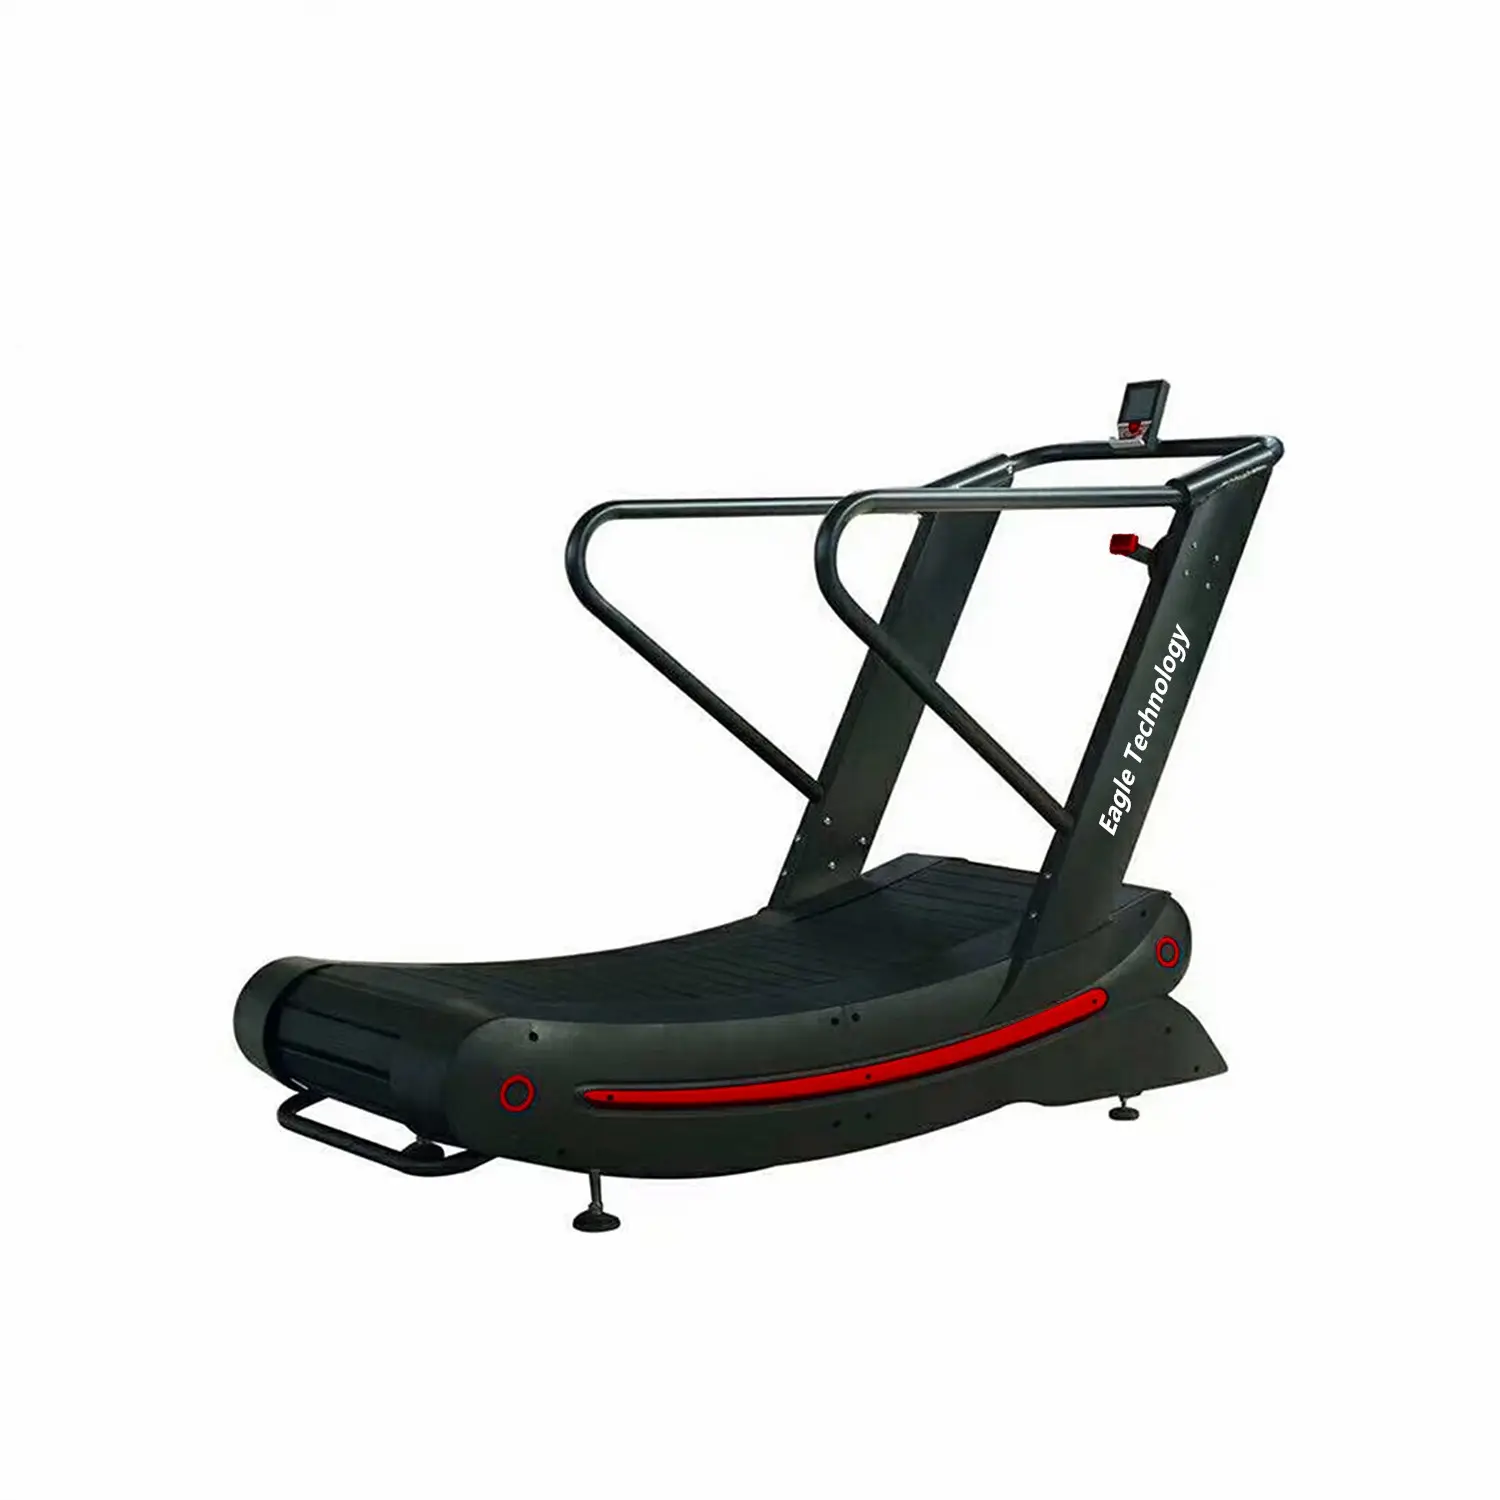 YG -T011 commercial fitness high quality Curve treadmill home and gym use treadmill for walking for sale